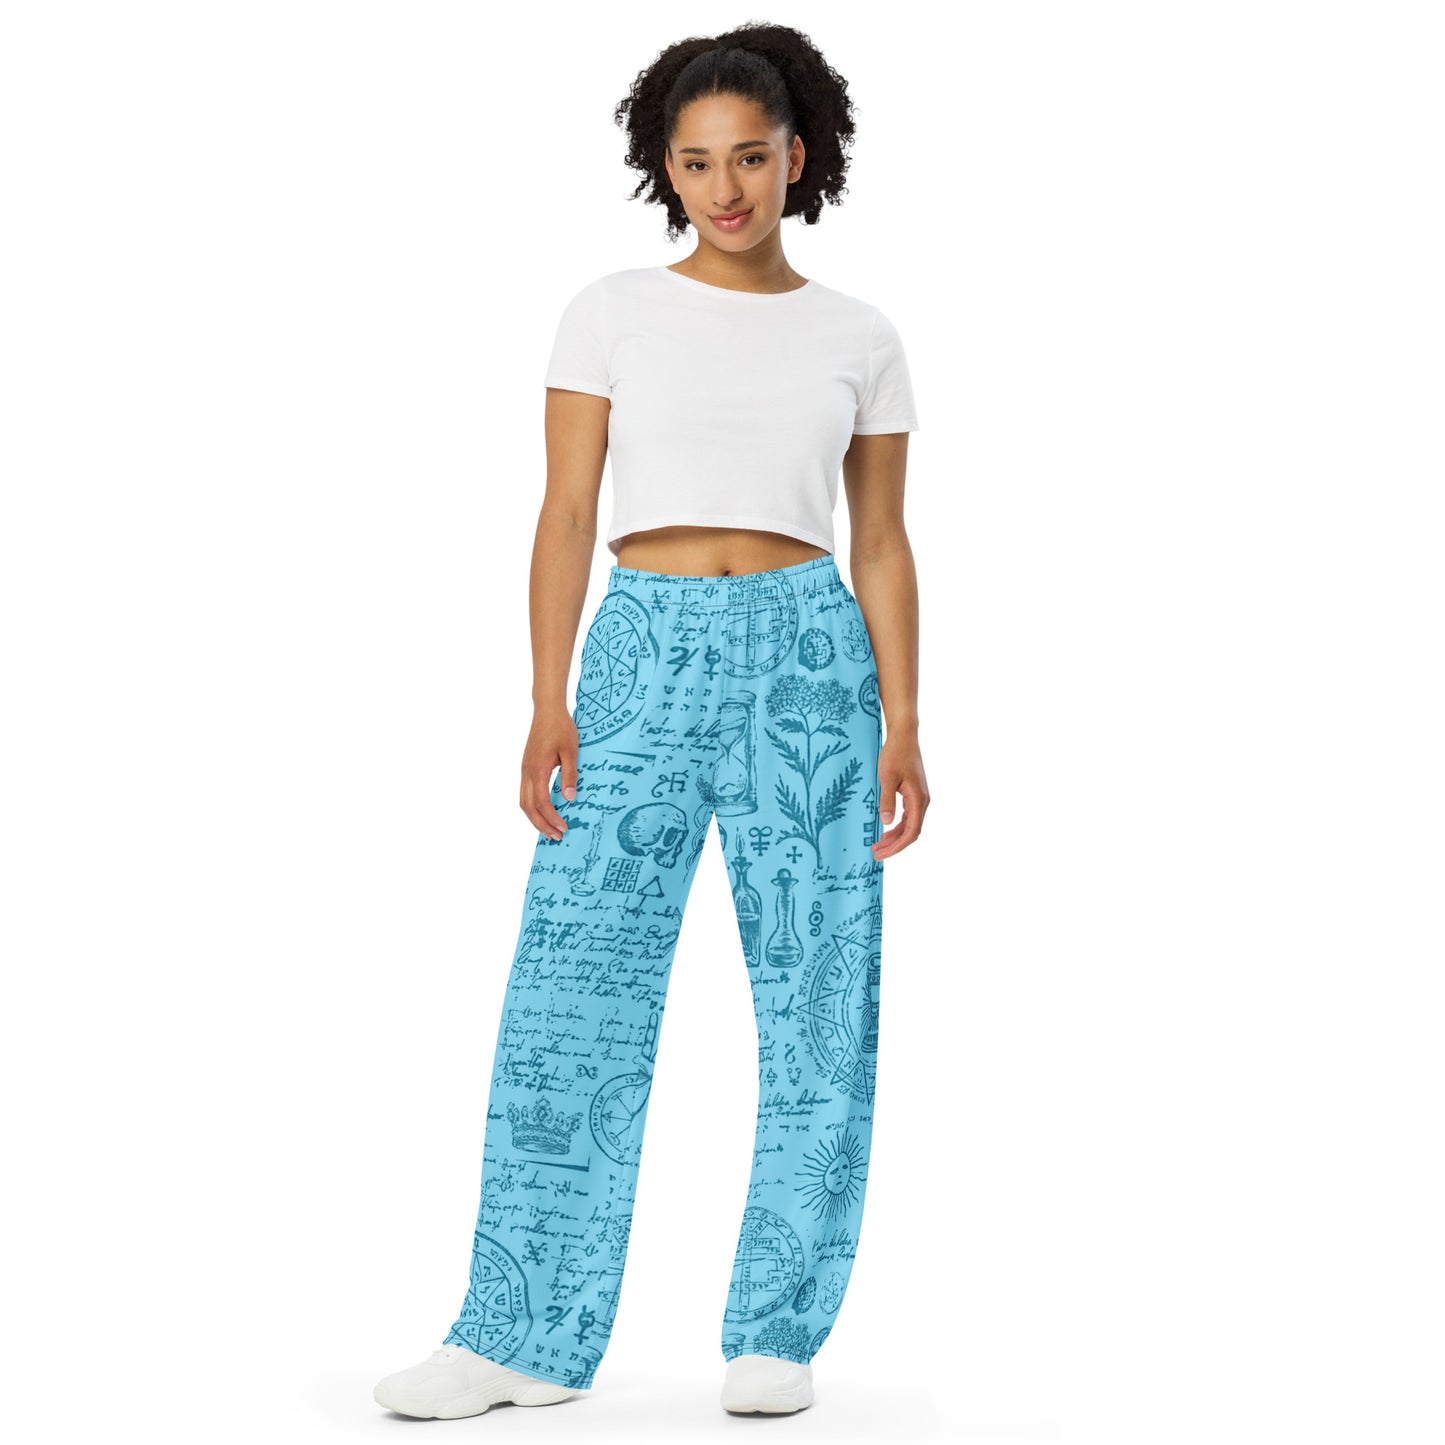 Alchemy Cyan Unisex Wide-Leg Pants (Geared Up Collection)